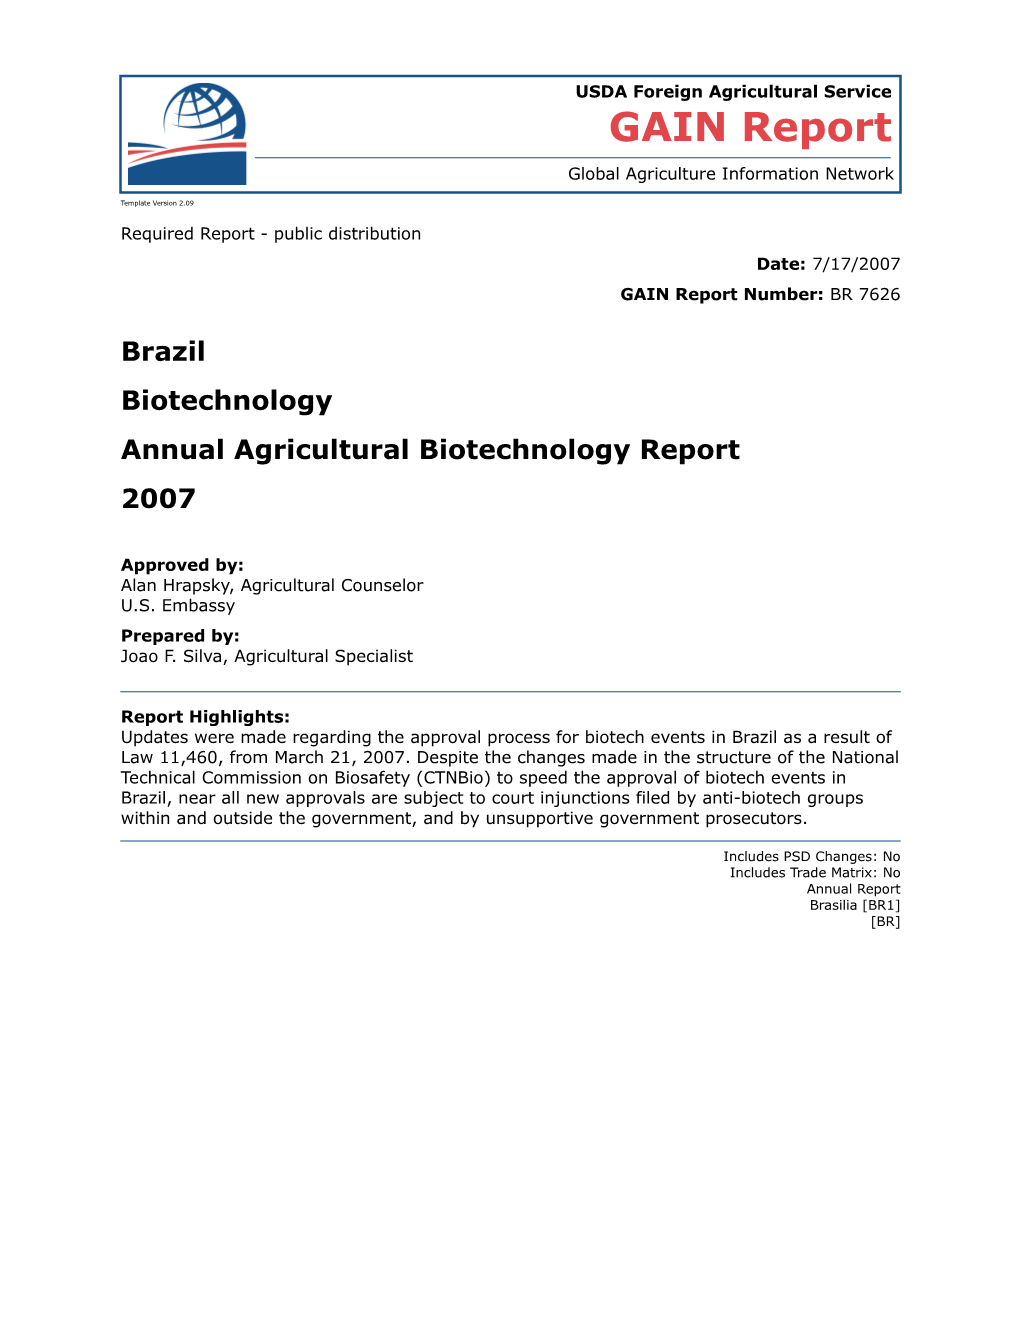 Annual Agricultural Biotechnology Report